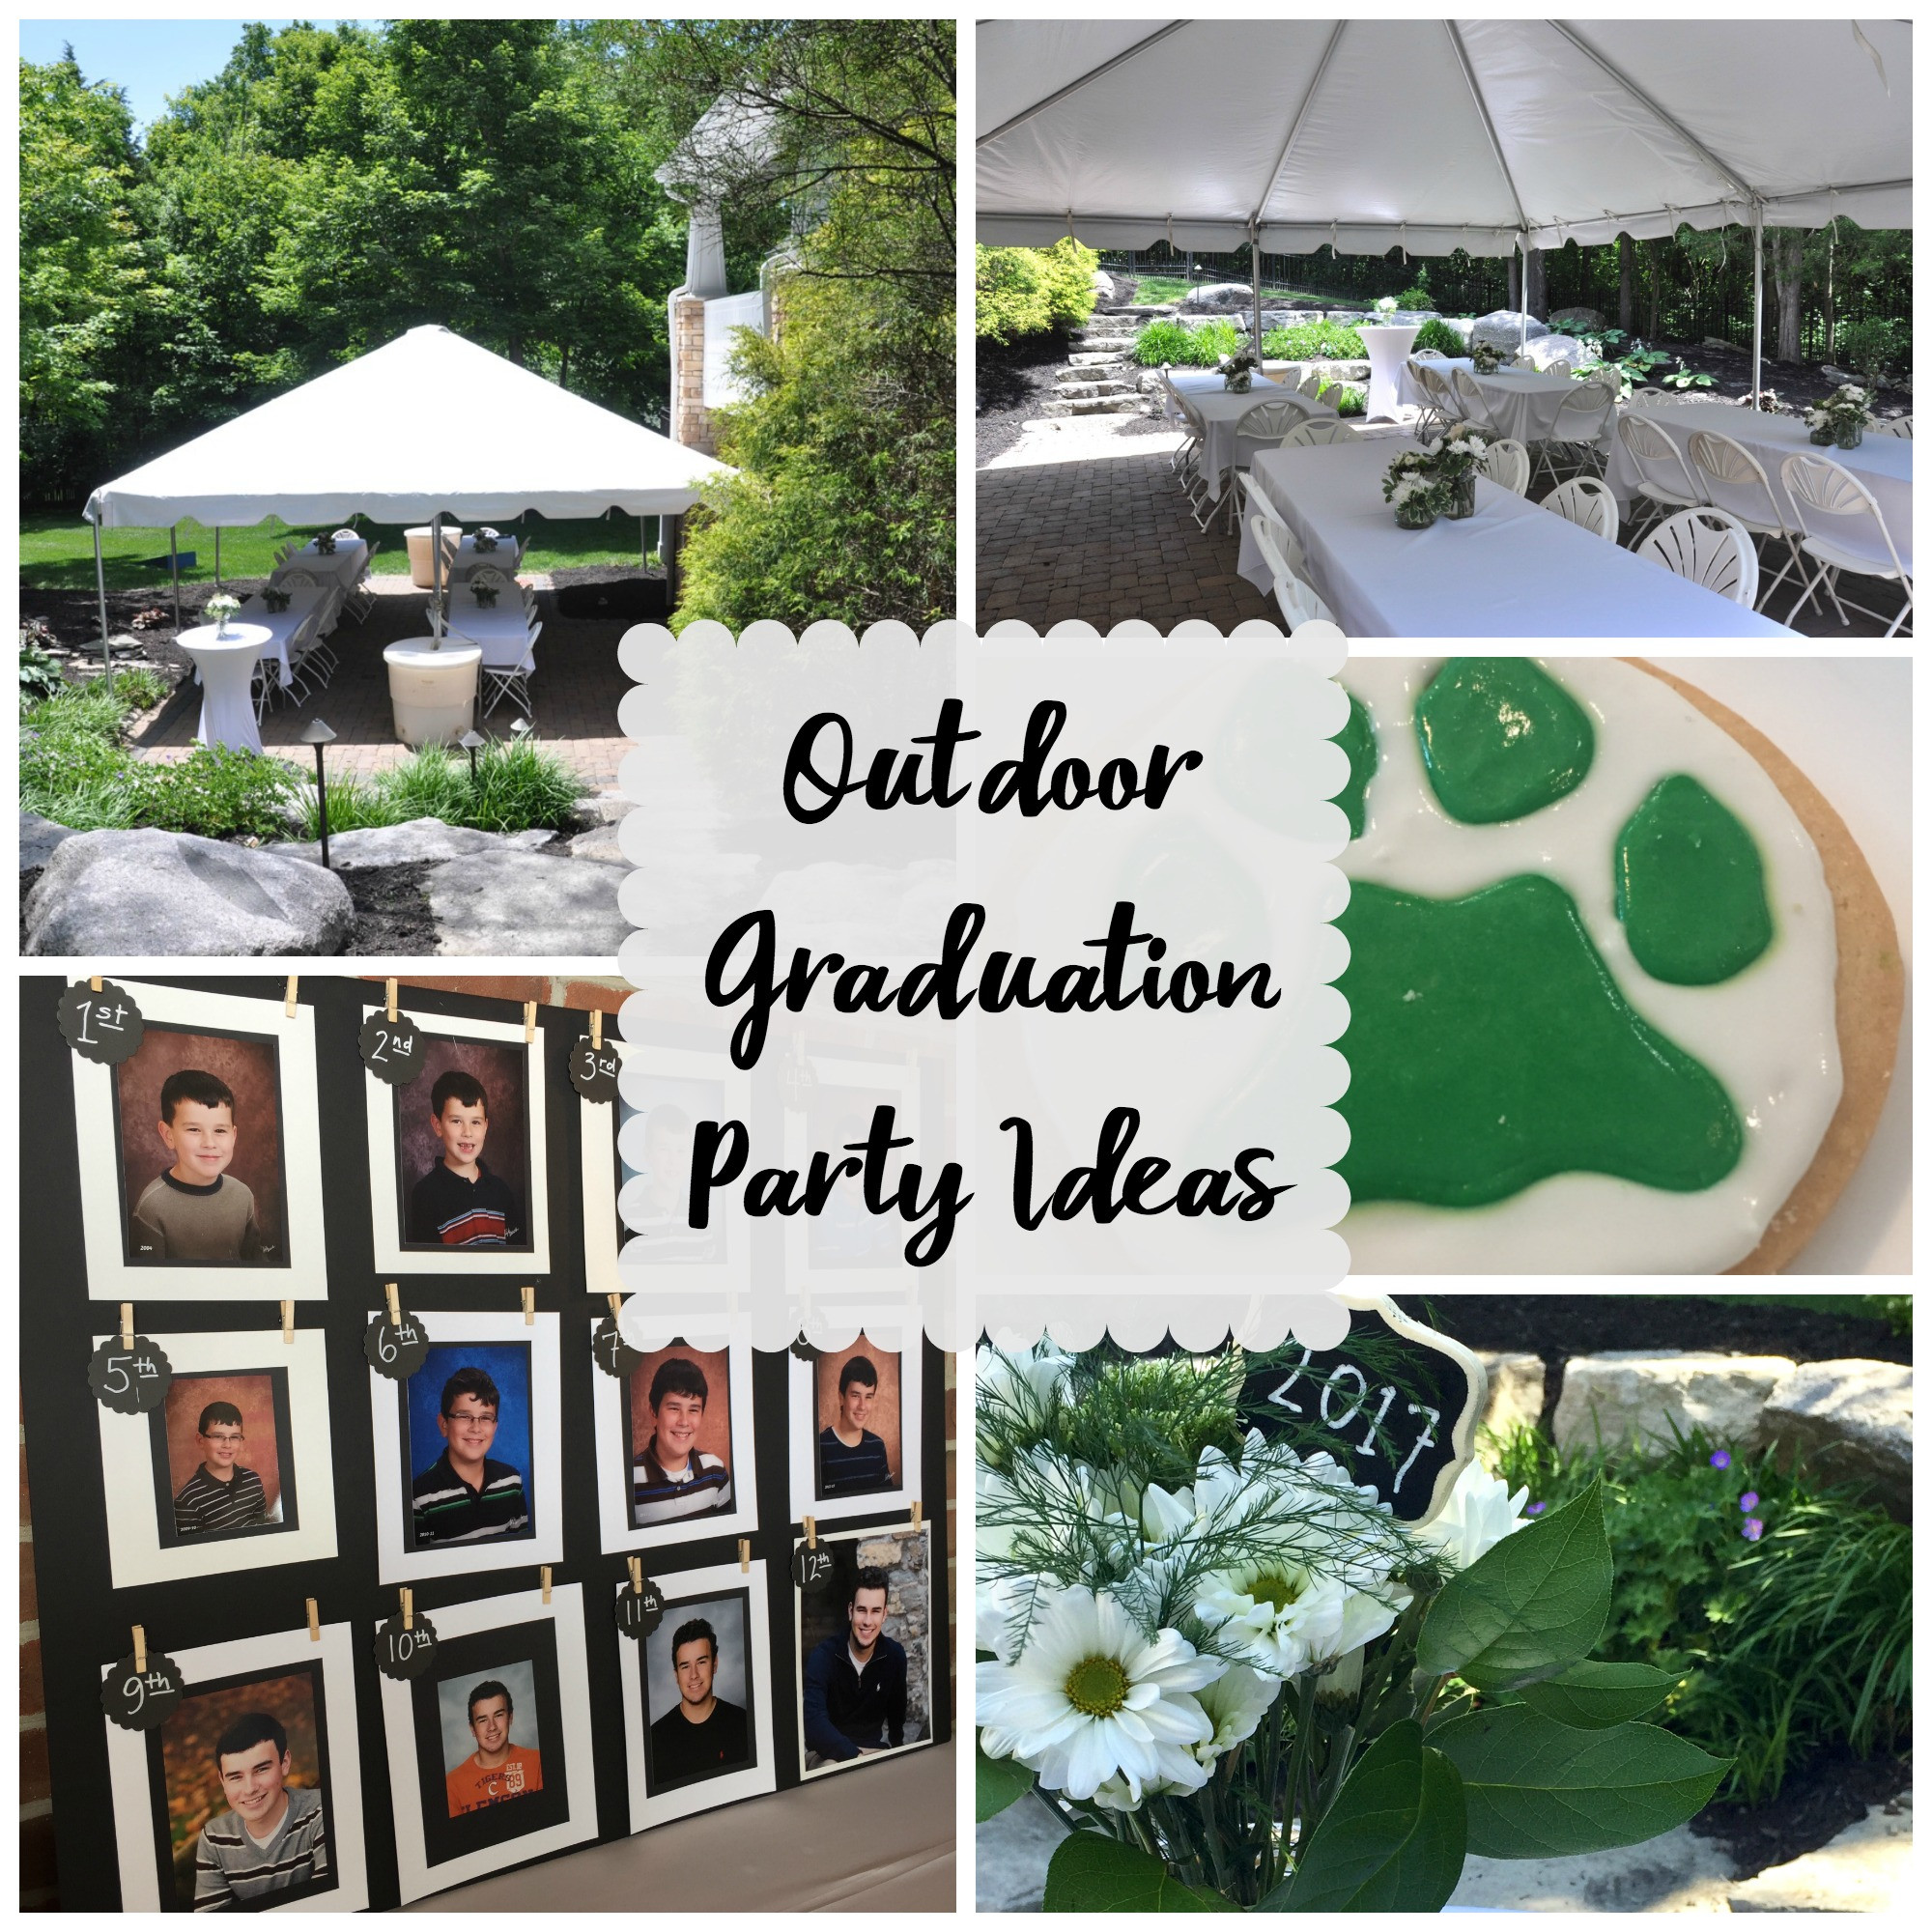 Masters Graduation Party Ideas
 Outdoor Graduation Party Evolution of Style